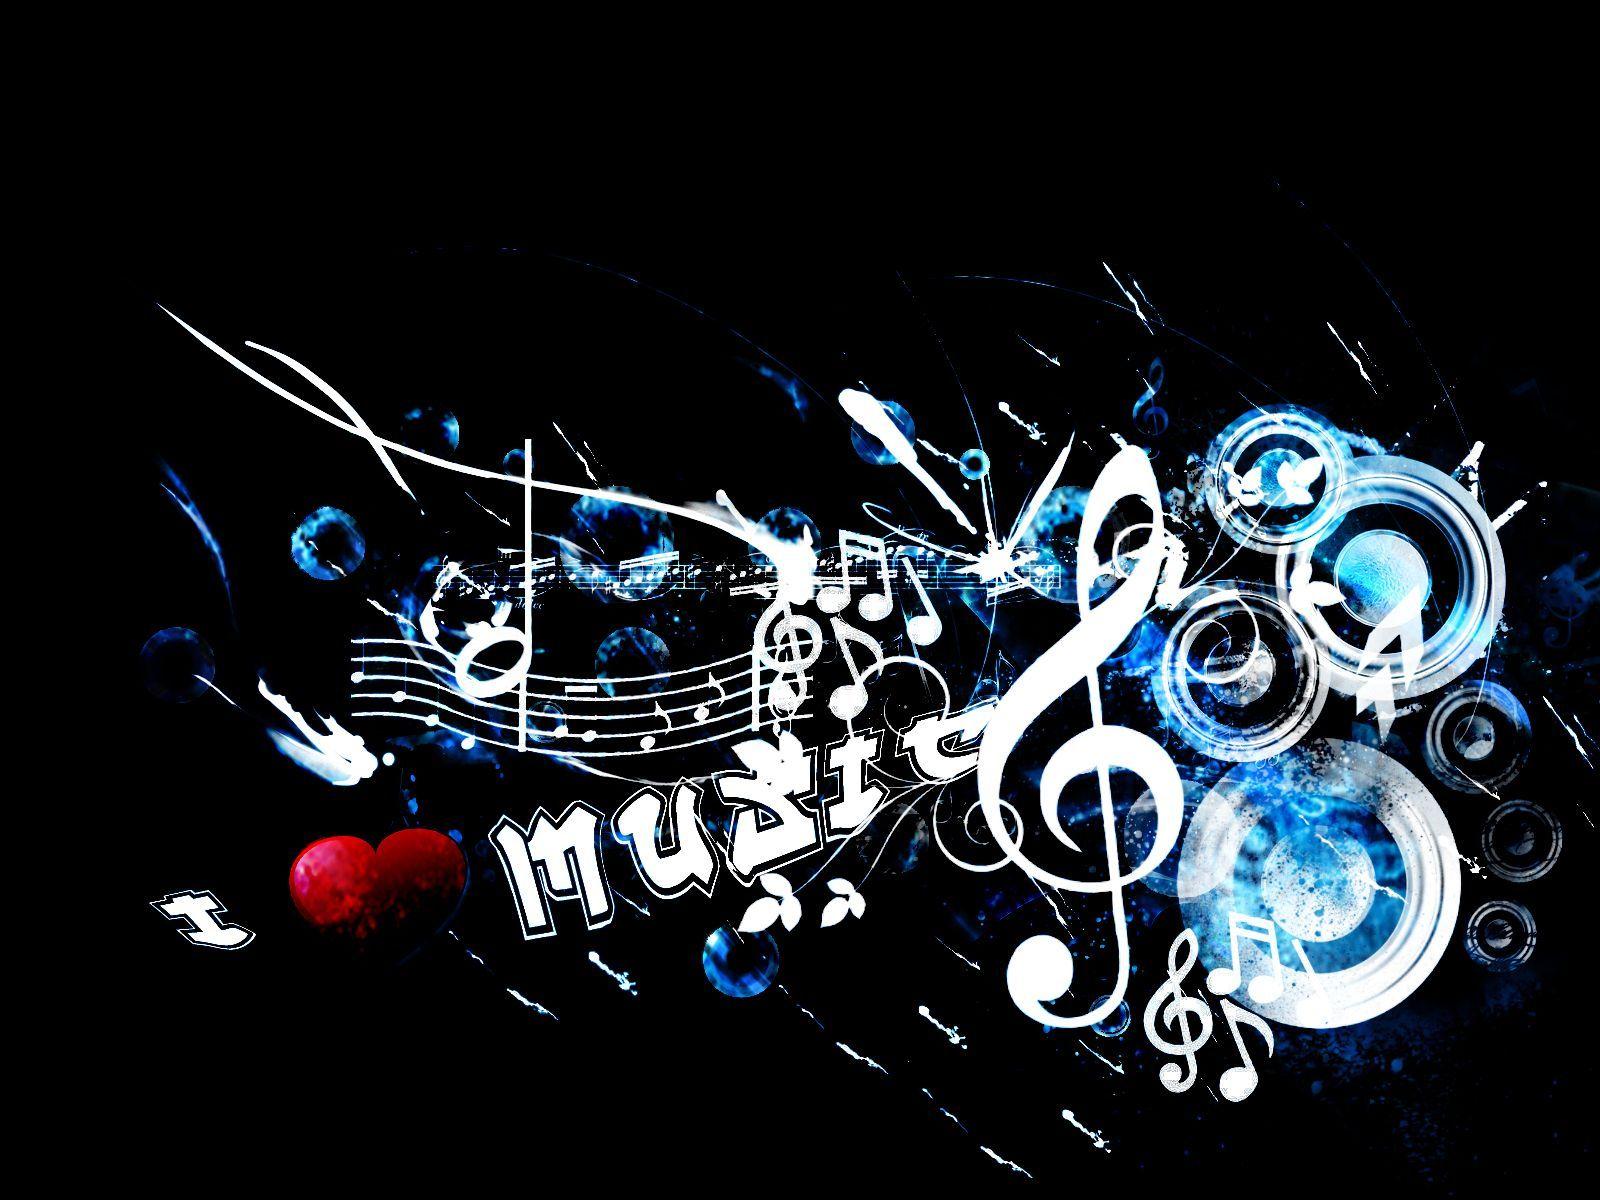 Image for Cool Music Graphics Wallpaper 1. Graphic Design